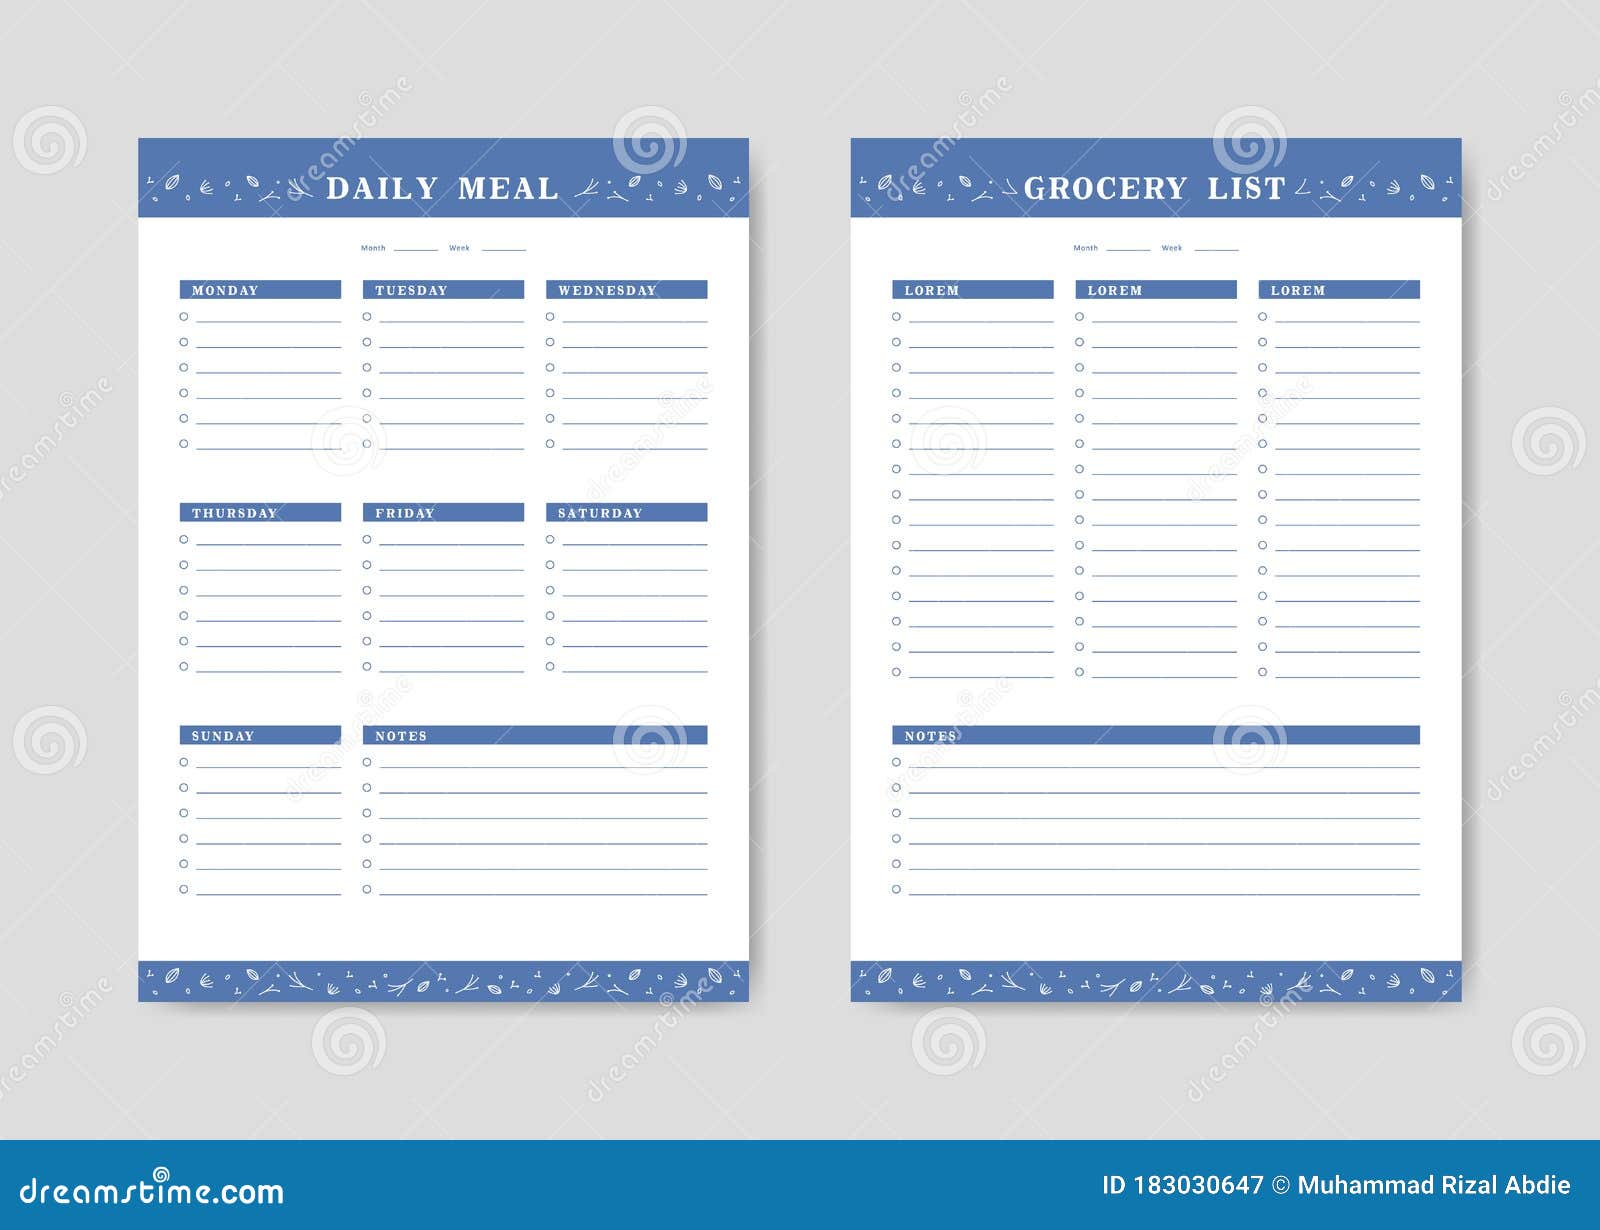 Menu Checklist Template from thumbs.dreamstime.com